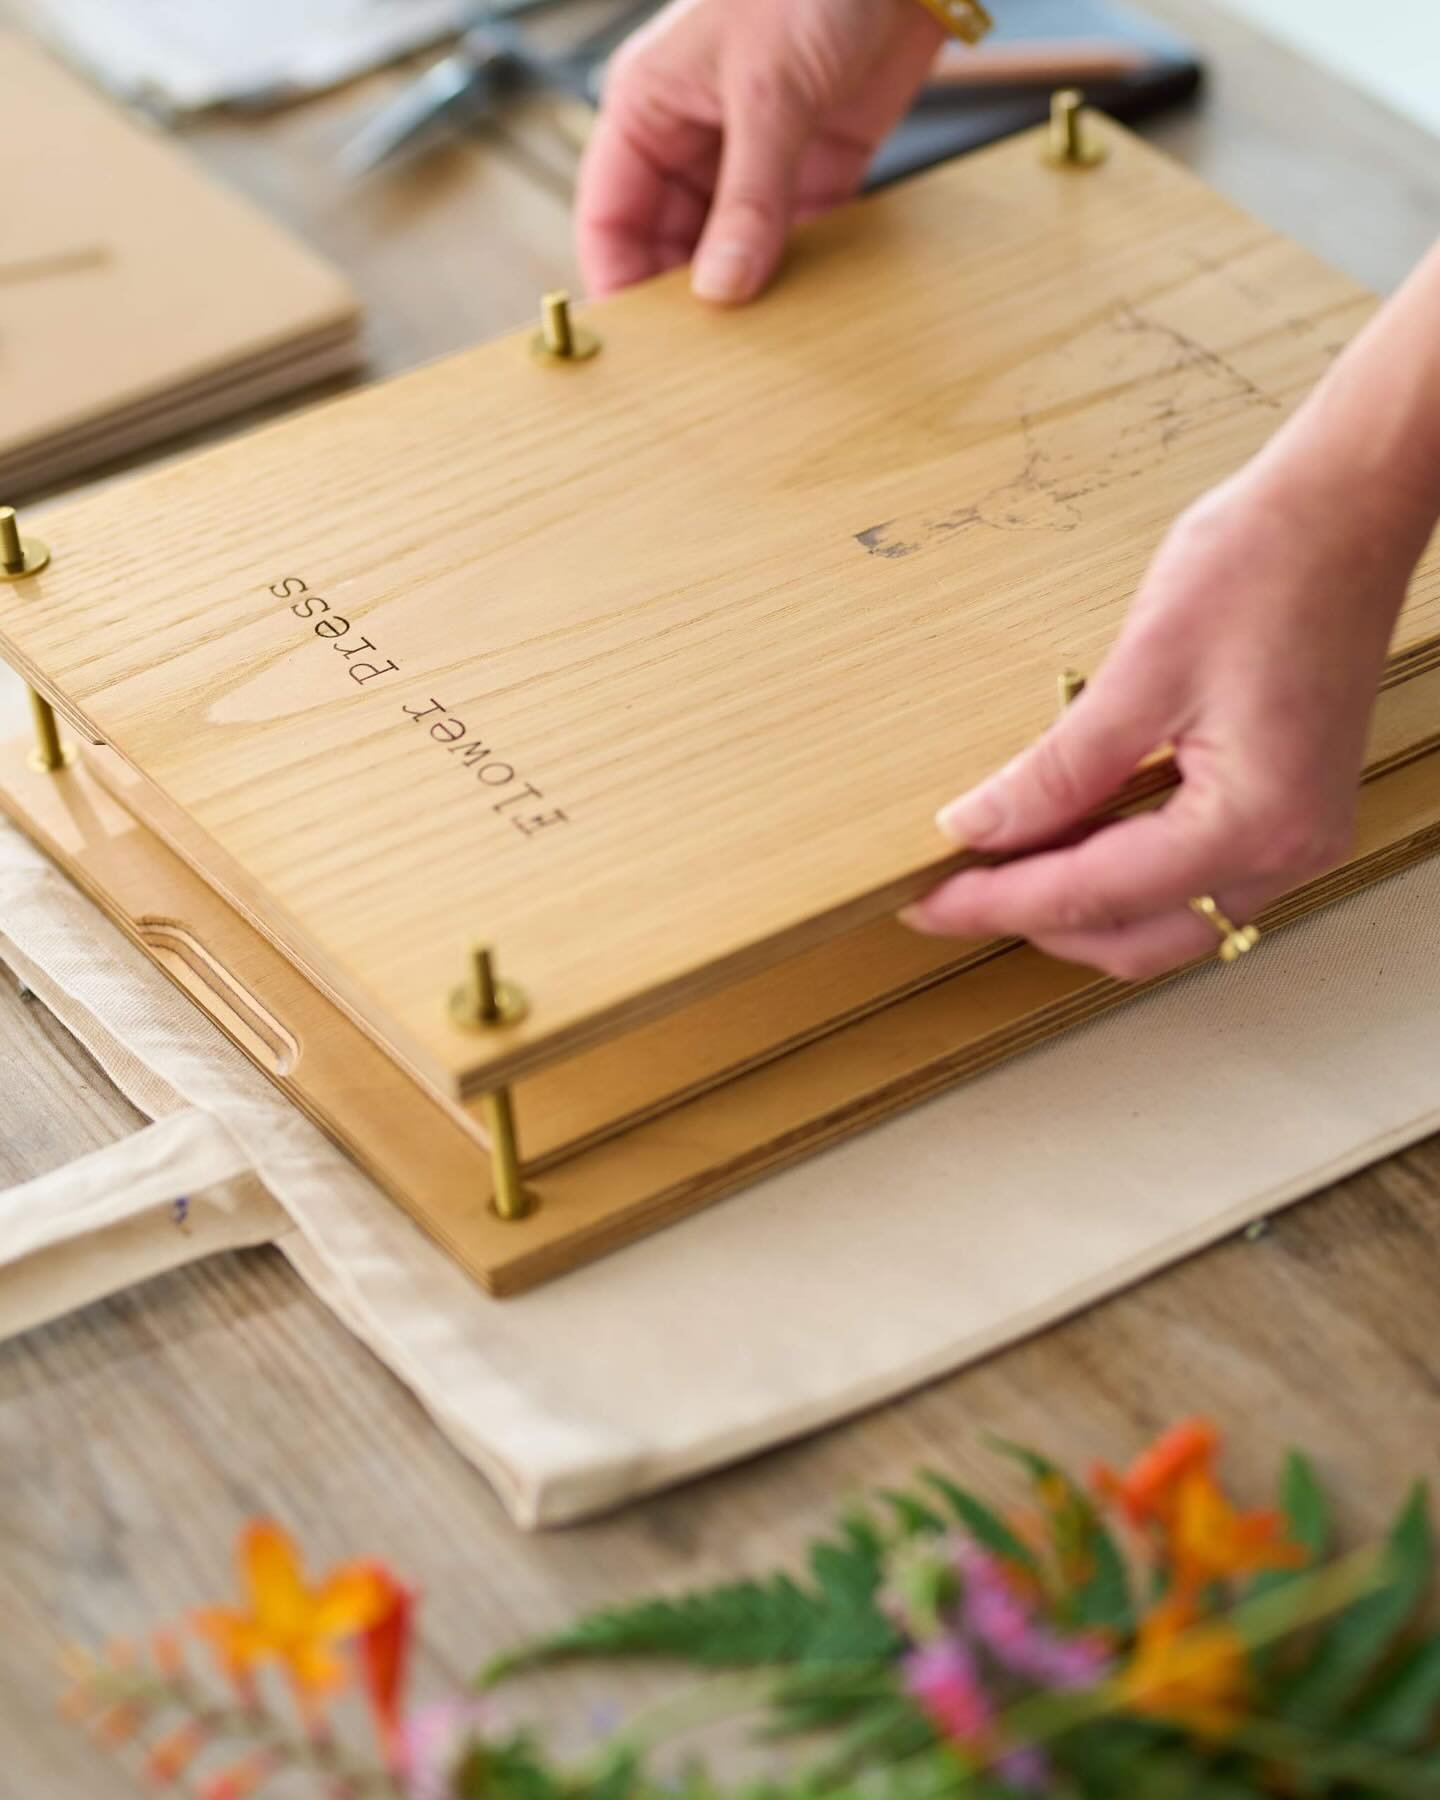 What&rsquo;s included with your Flower Press? 🌿

Your flower press comes with 4 cardboard separators and 4 precious sheets of thick, highly absorbent blotting paper, so you are ready to press your first flowers the day it arrives.

We&rsquo;ve also 